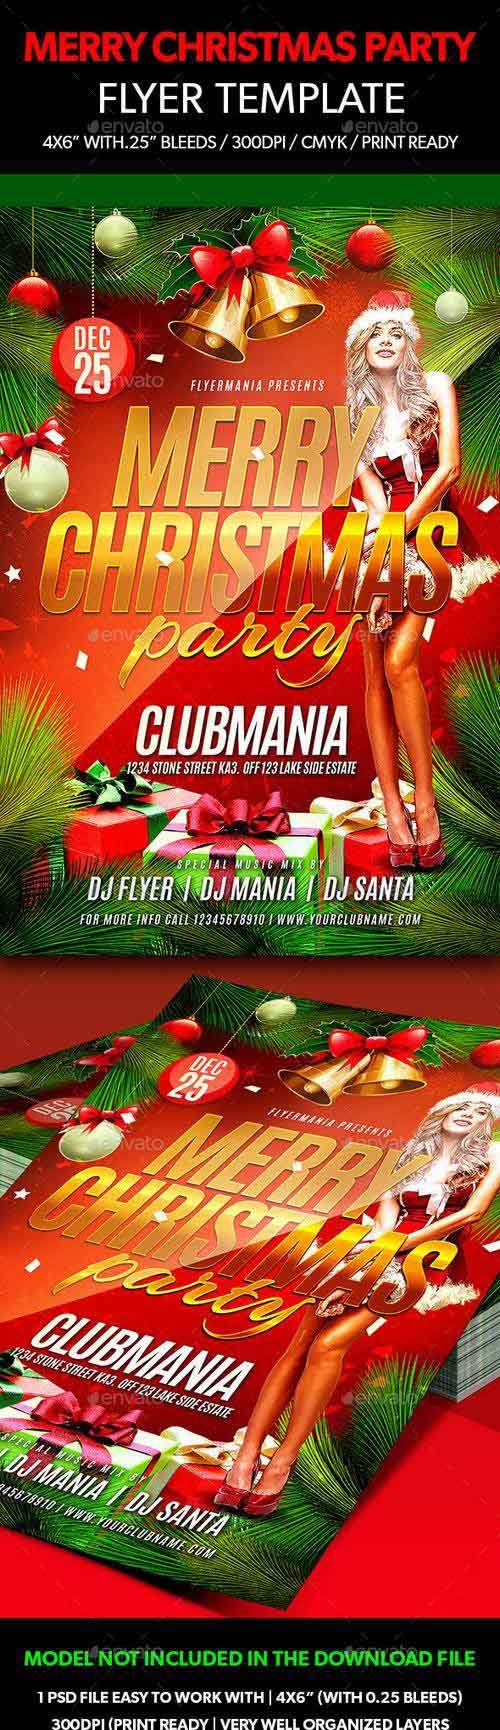 Merry Christmas Party Flyer Template 13235246